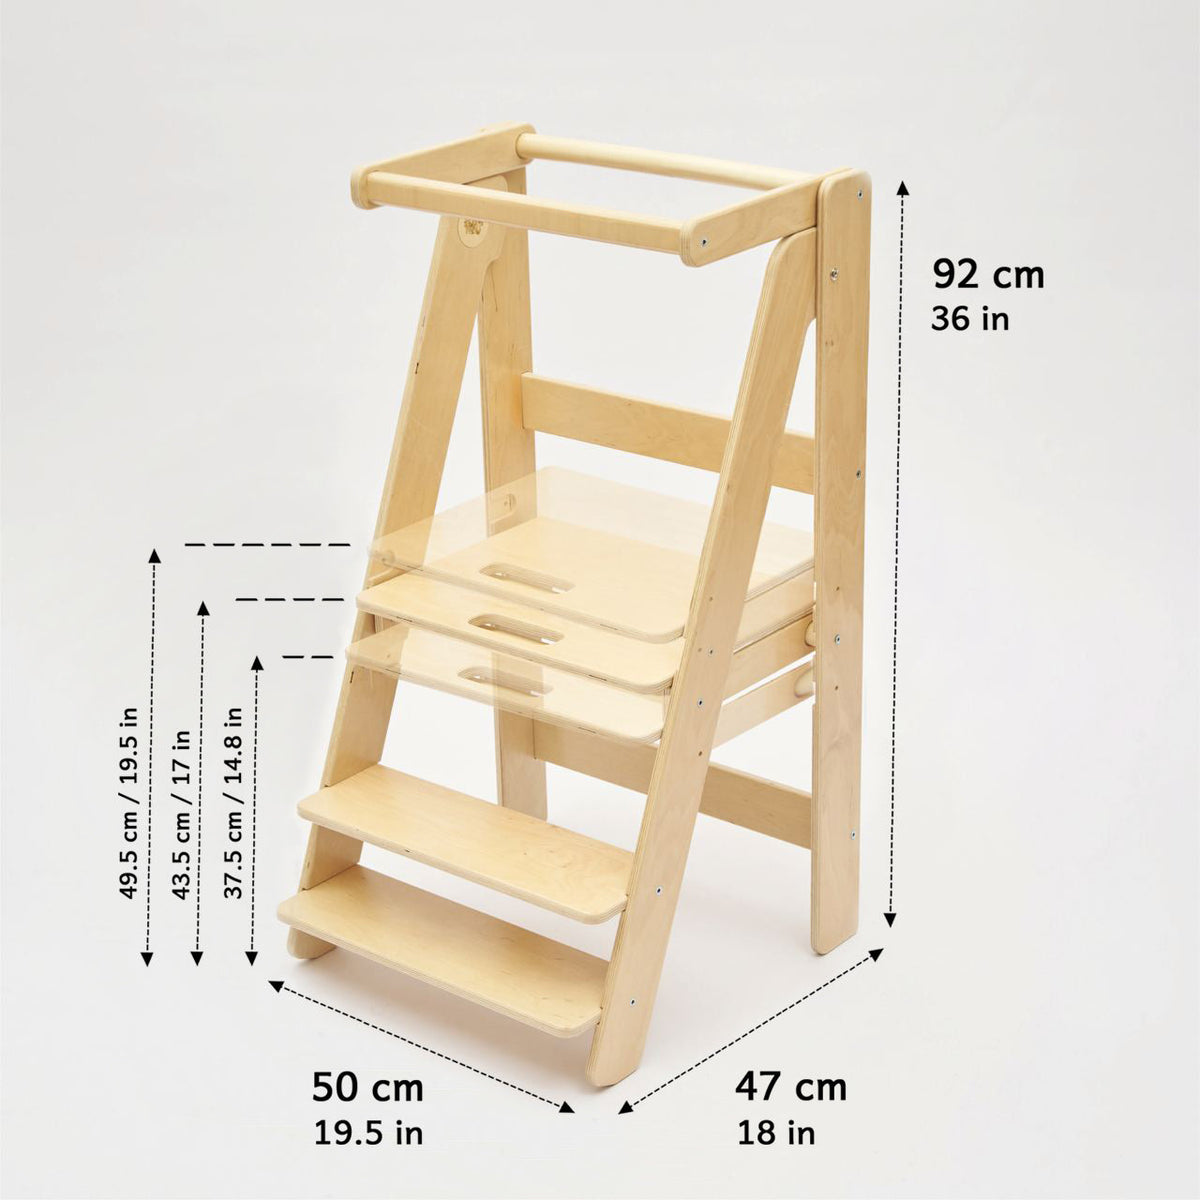 Collapsible learning tower - coating free